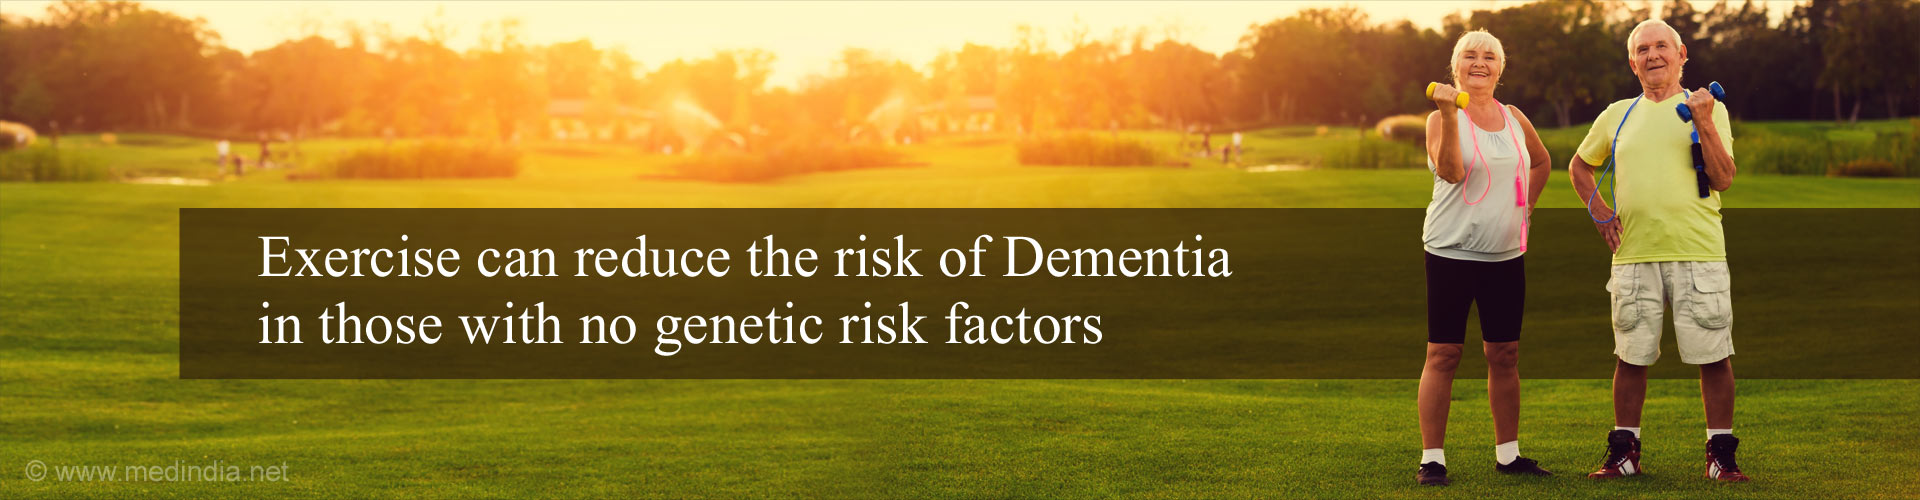 Exercise can reduce the risk of dementia in those with no genetic risk factors